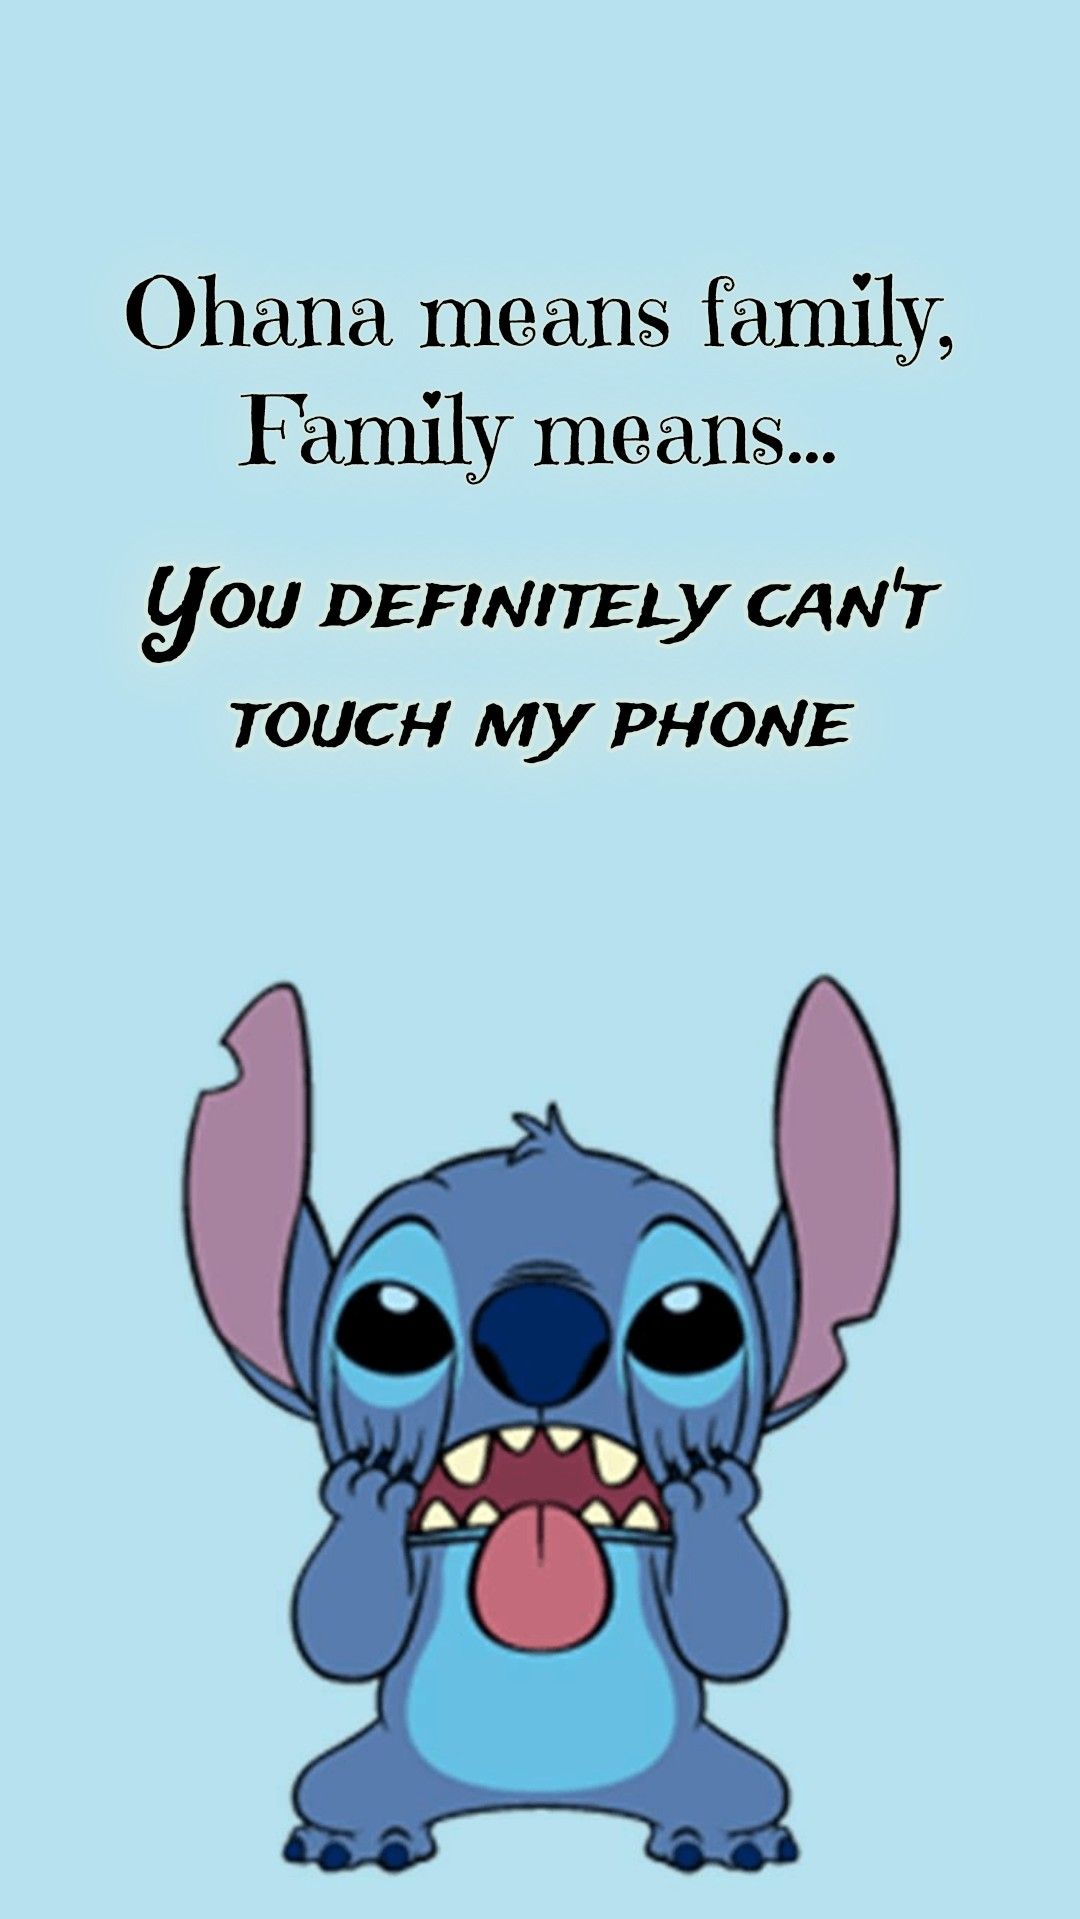 Ohana dont touch wallpaper. Lilo and stitch quotes, iPhone wallpaper quotes funny, Lilo and stitch drawings